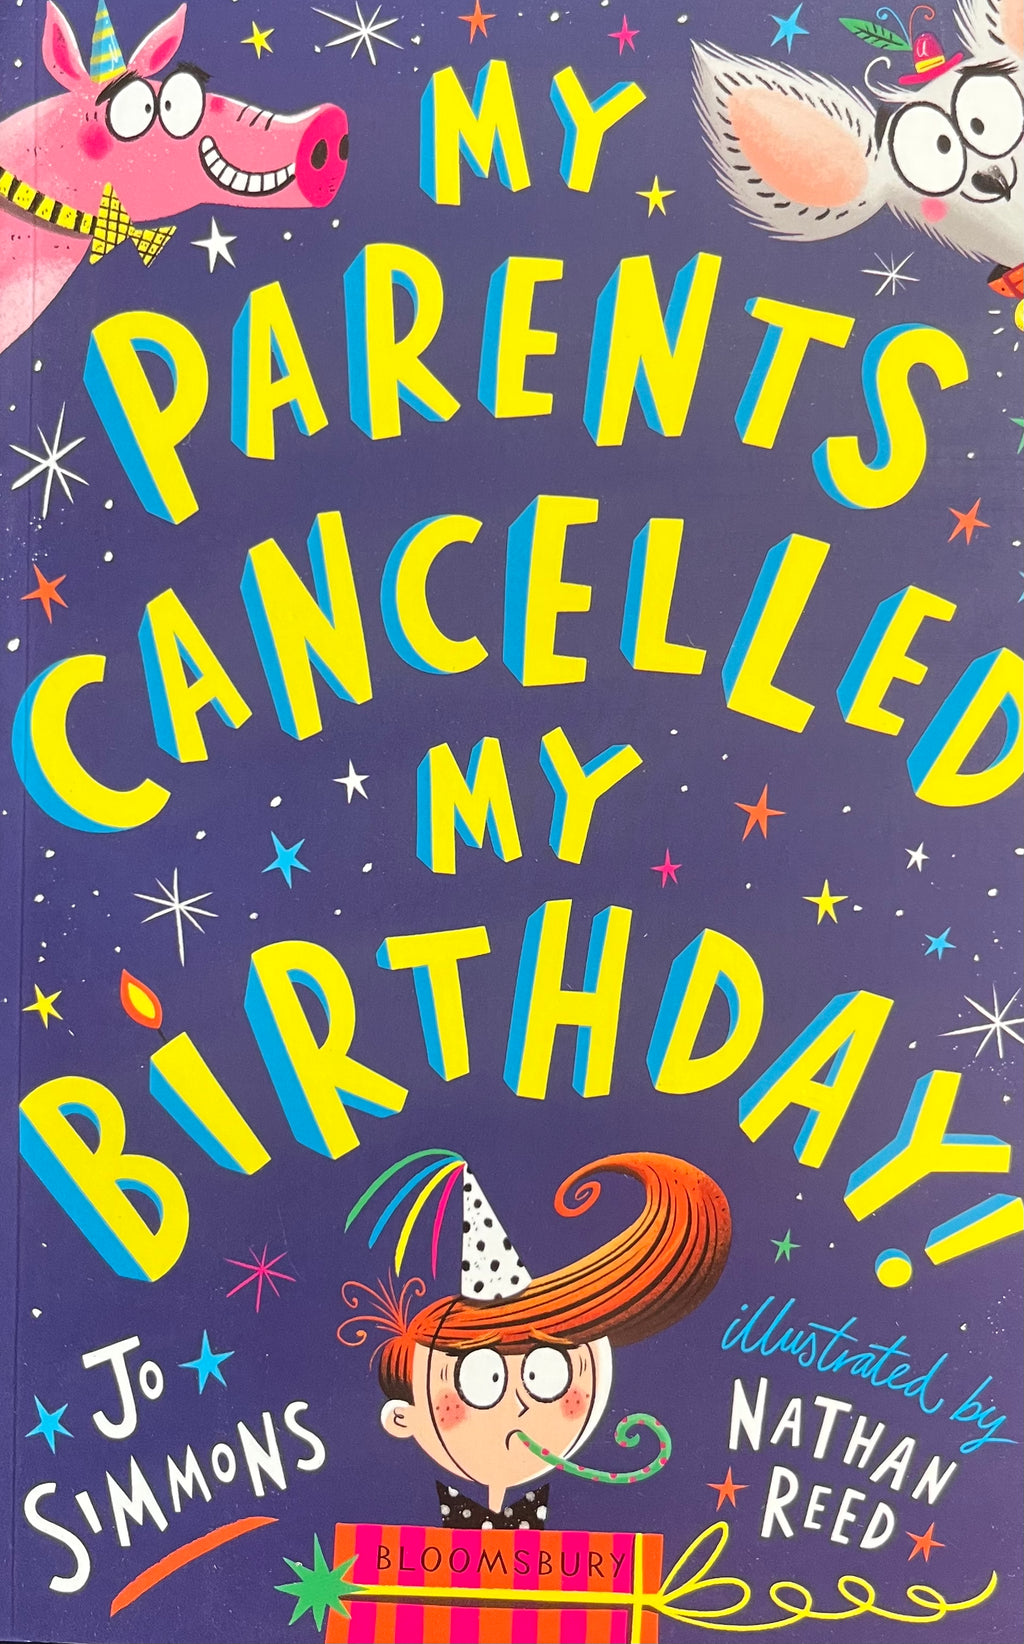 My Parents cancelled my birthday